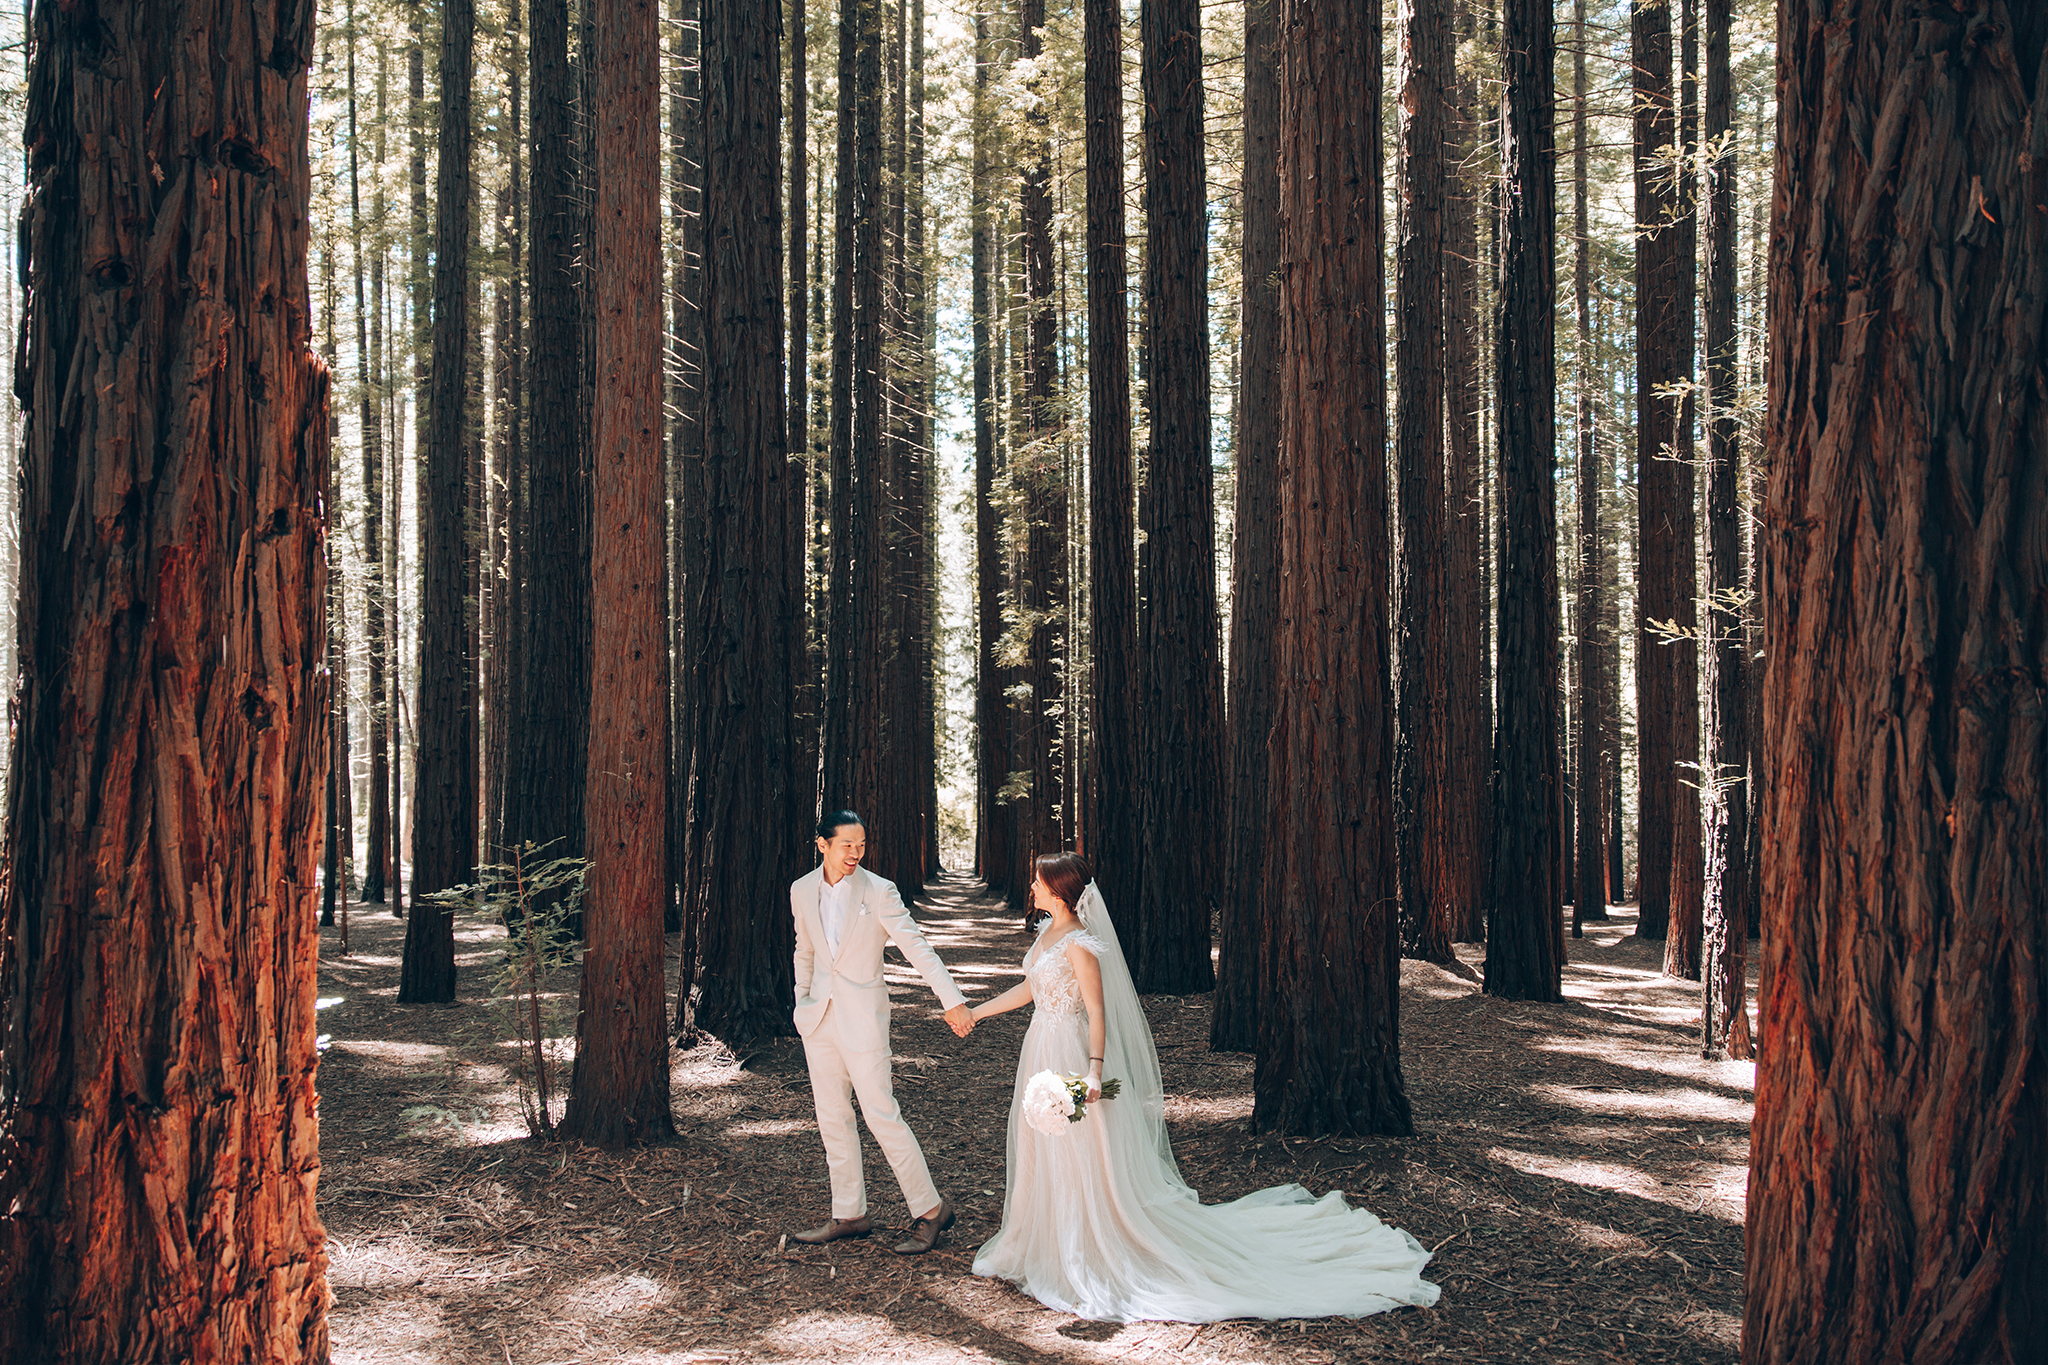 Melbourne Pre-Wedding Photoshoot in Redwood Forest by Freddy on OneThreeOneFour 6